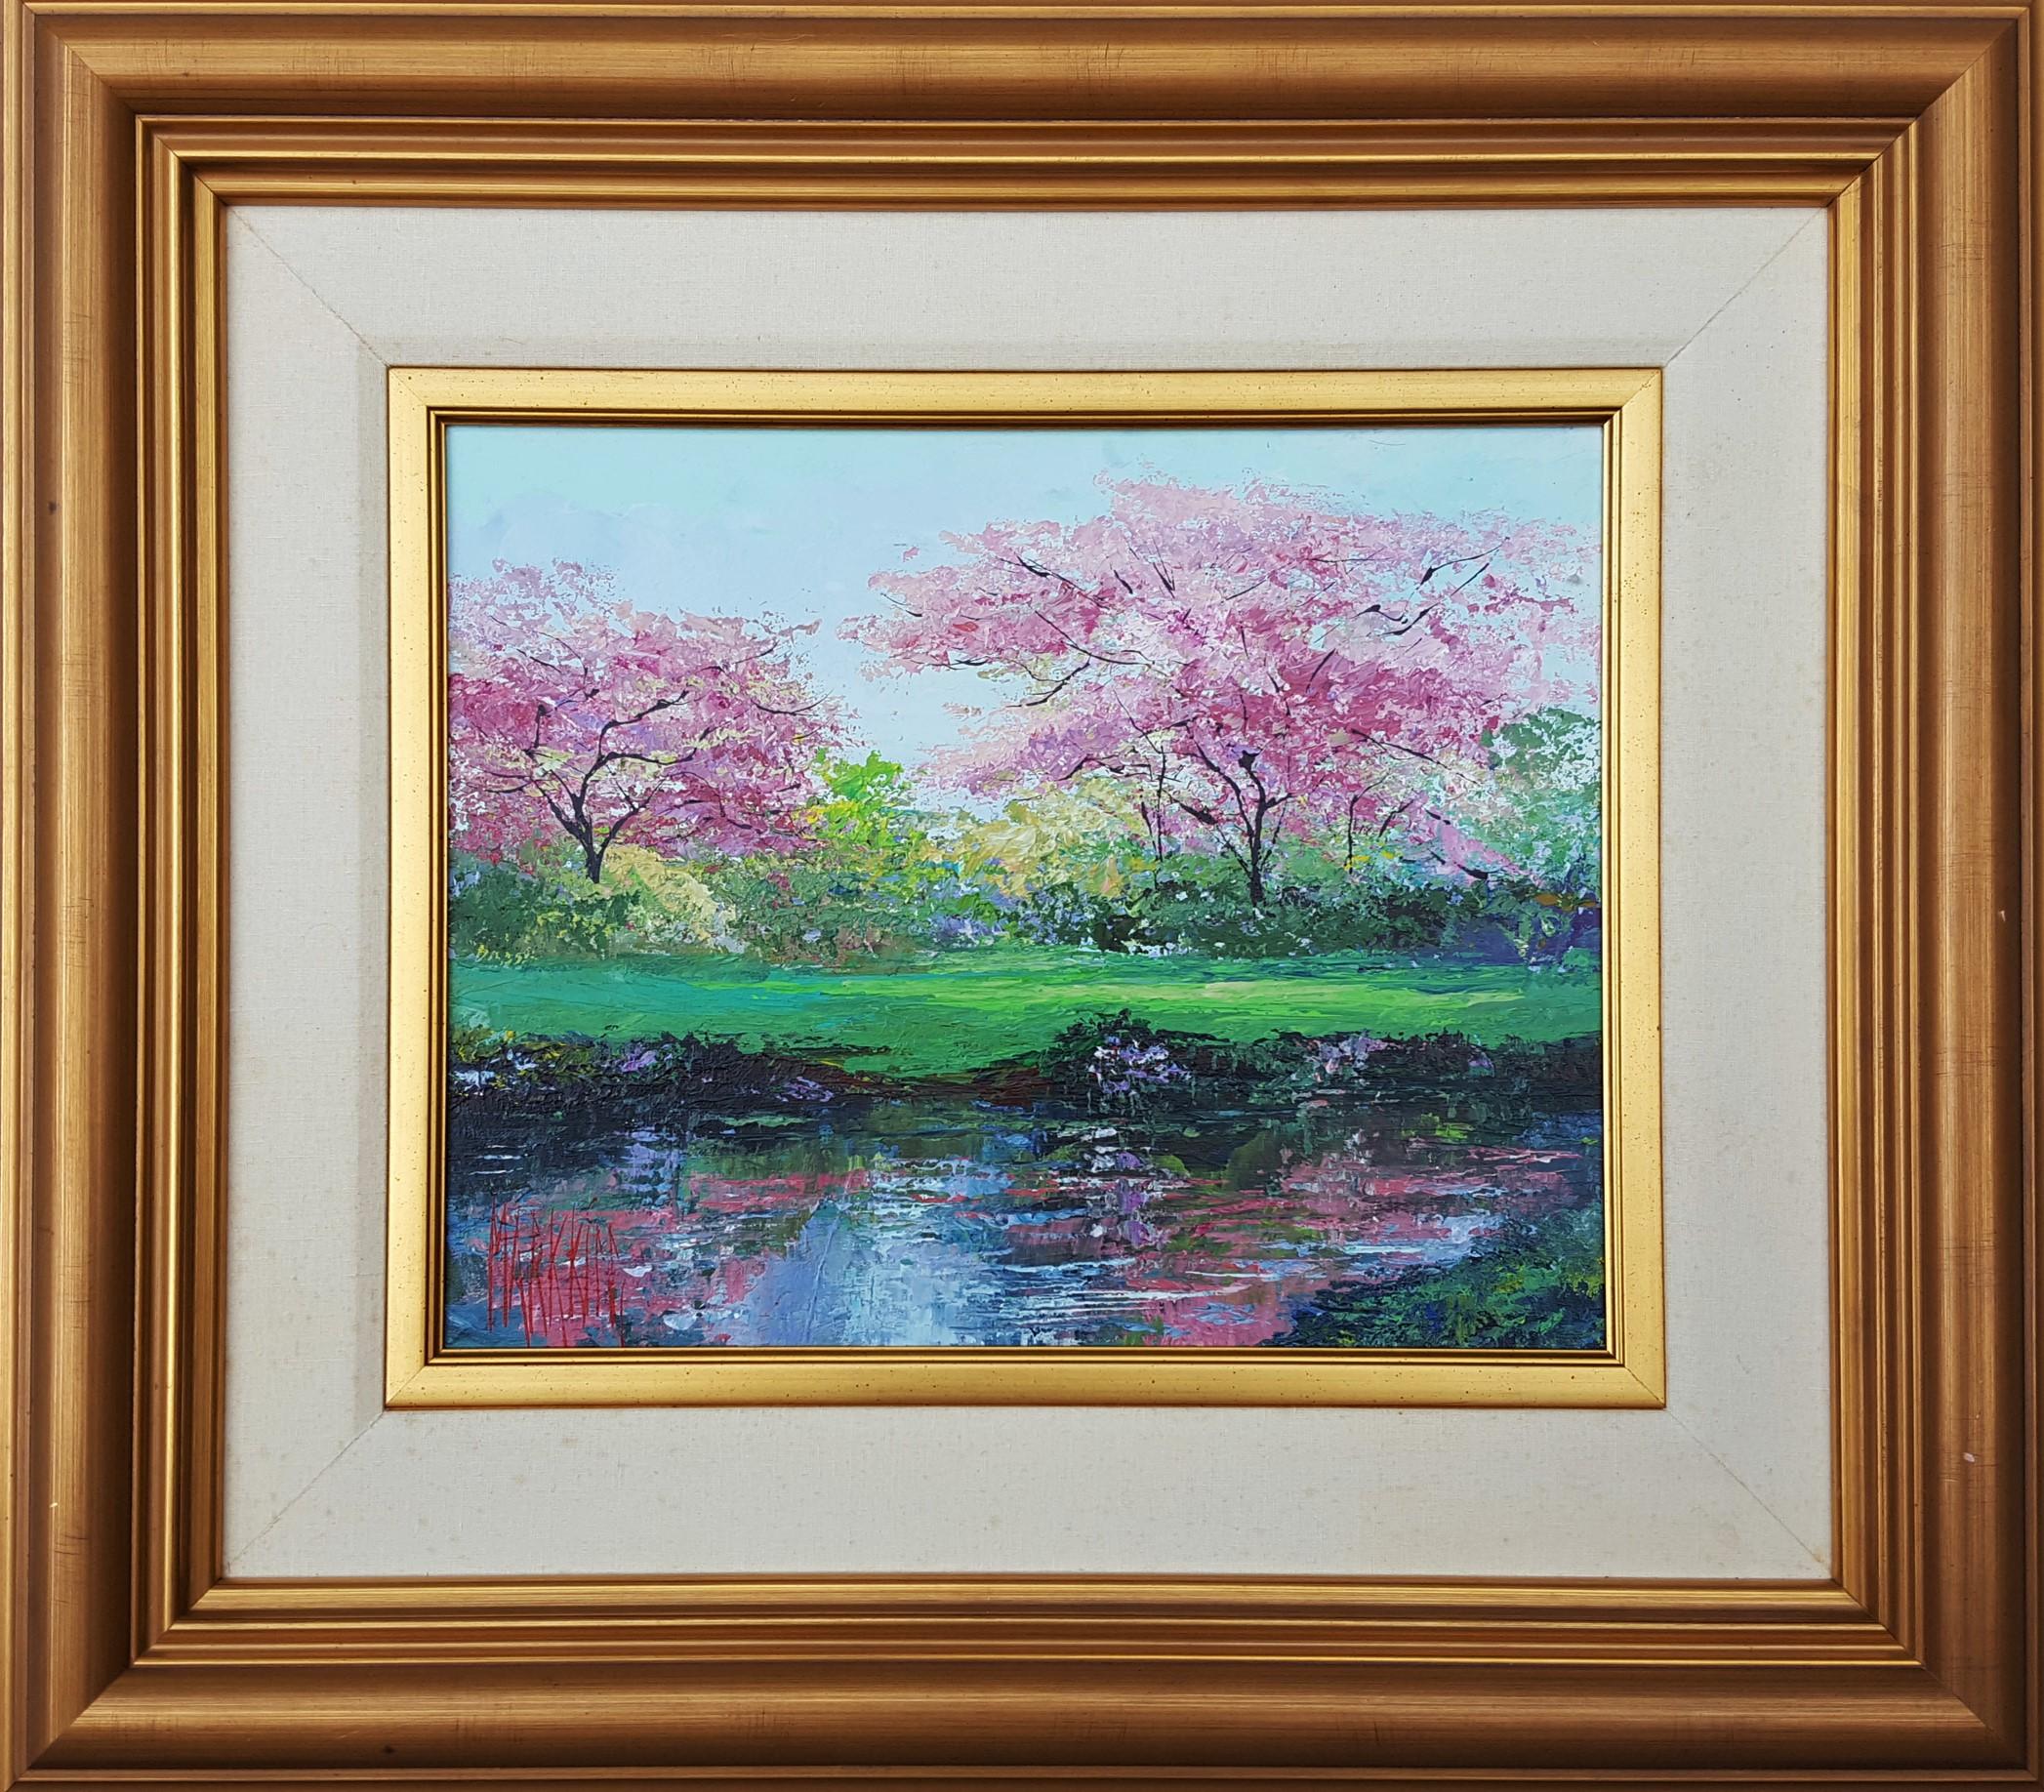 Plum Blossoms - Painting by Mark King